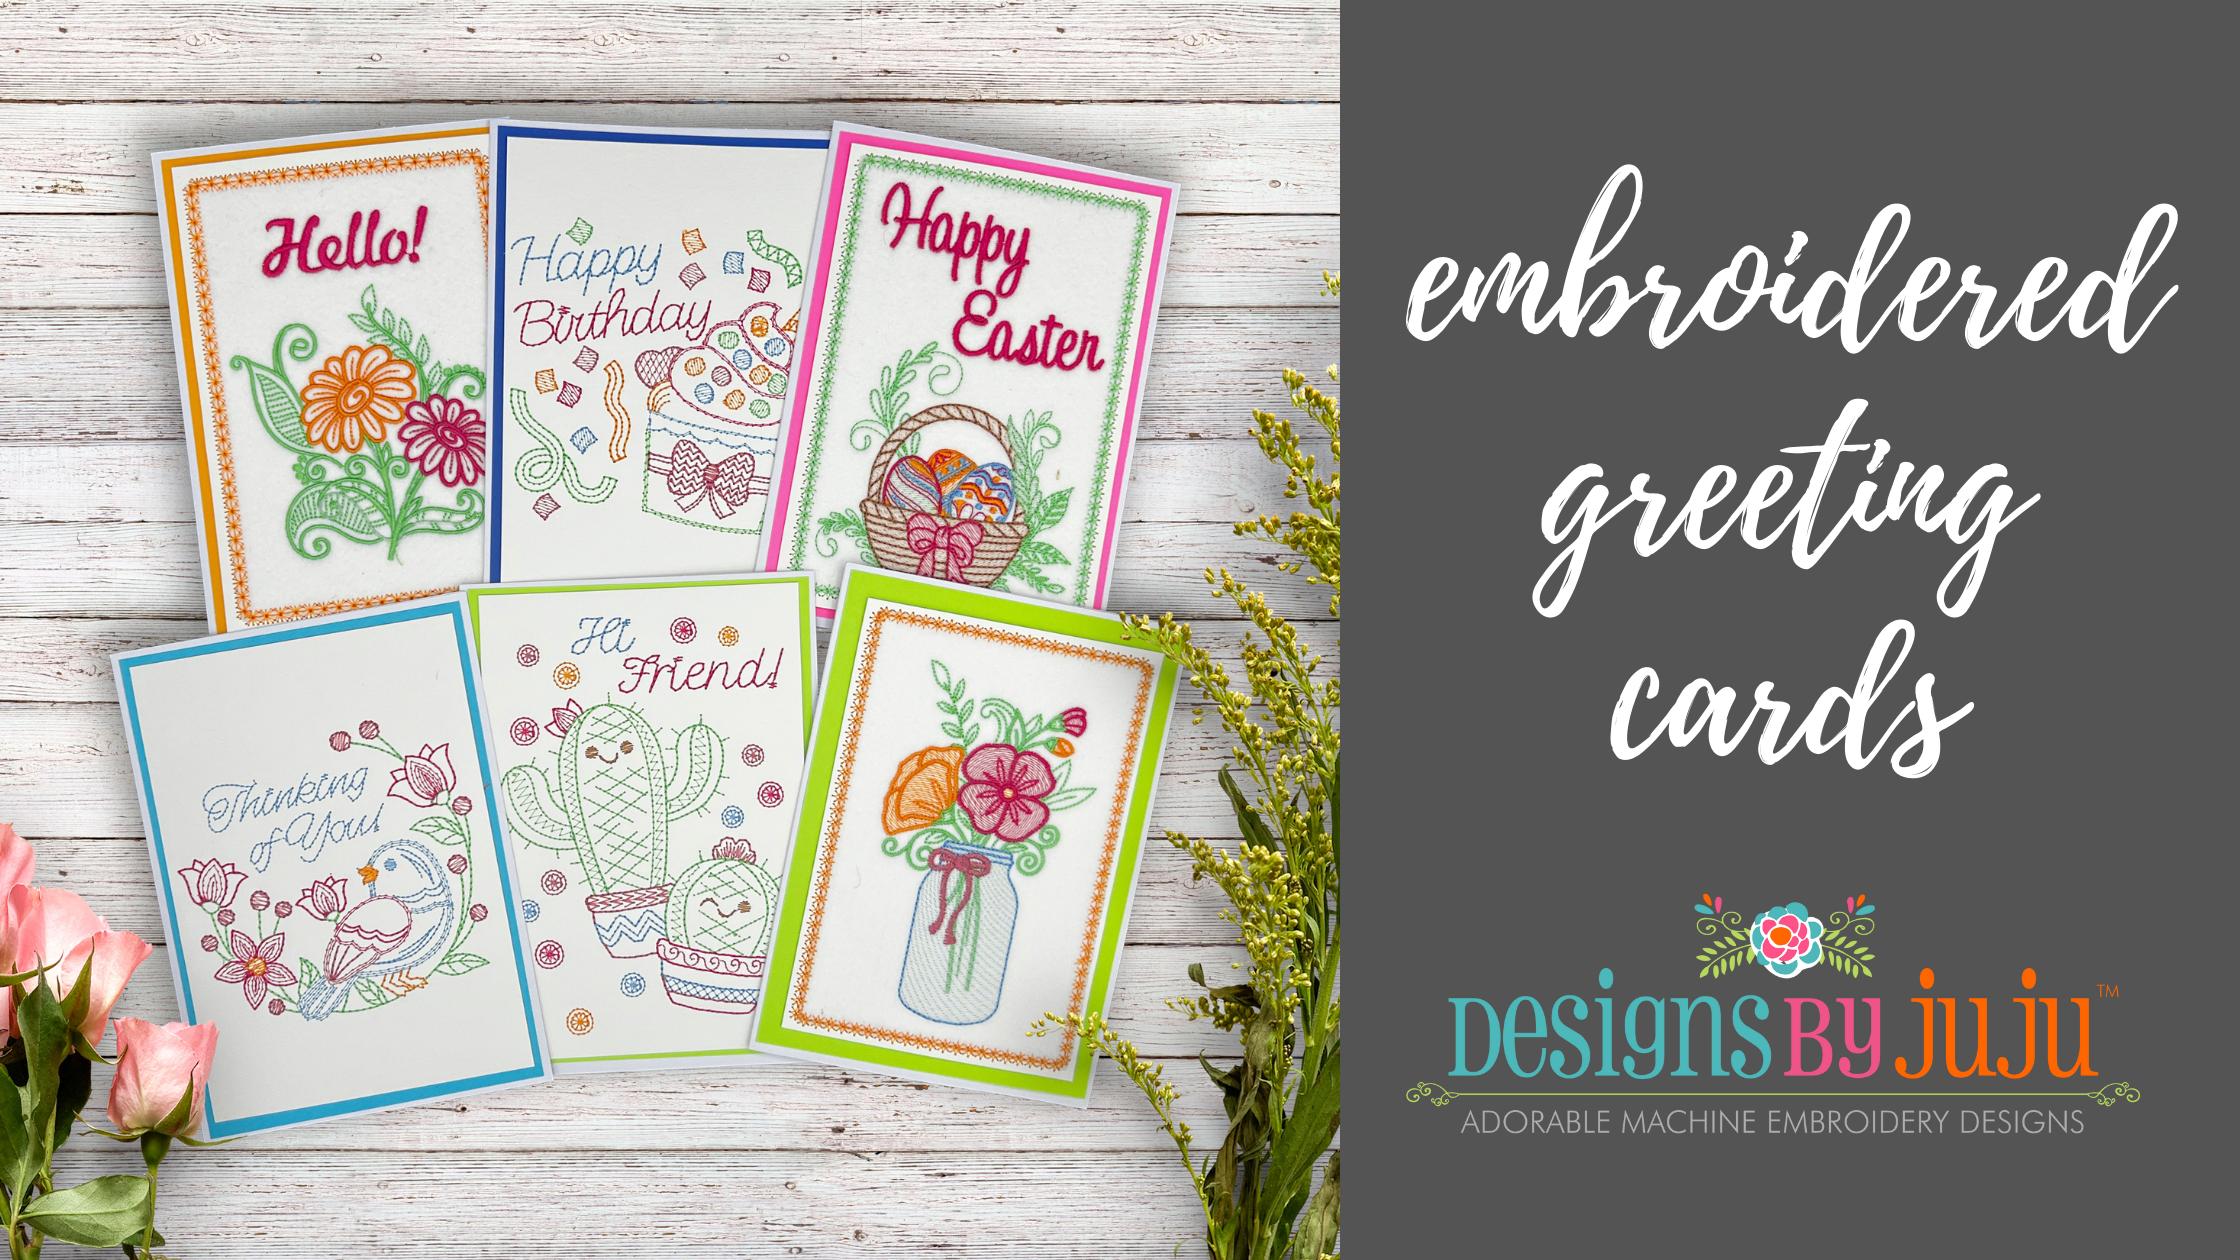 Hand-embroidered Card  Paper embroidery, Sewing cards, Embroidery